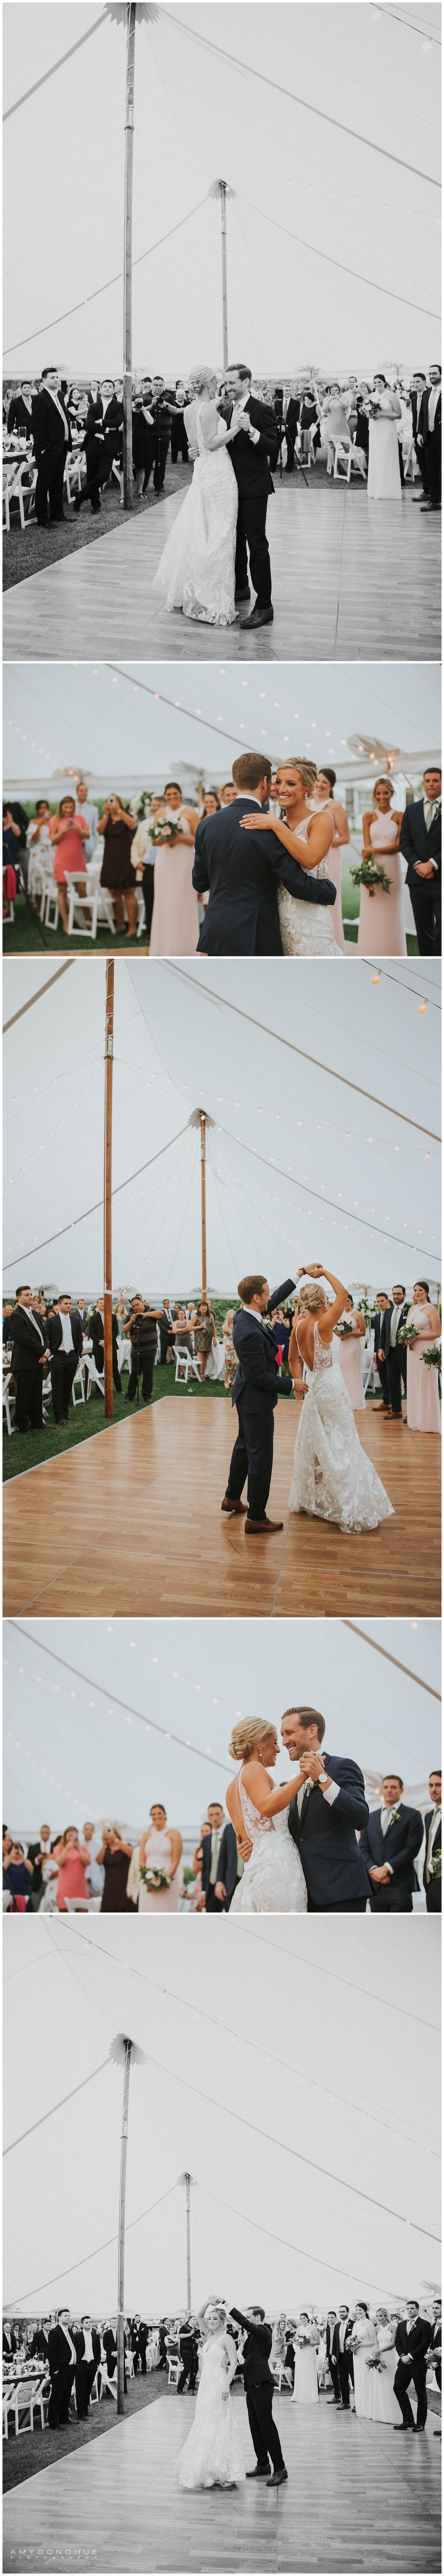 First Dance | Vermont Wedding Photographer | © Amy Donohue Photography